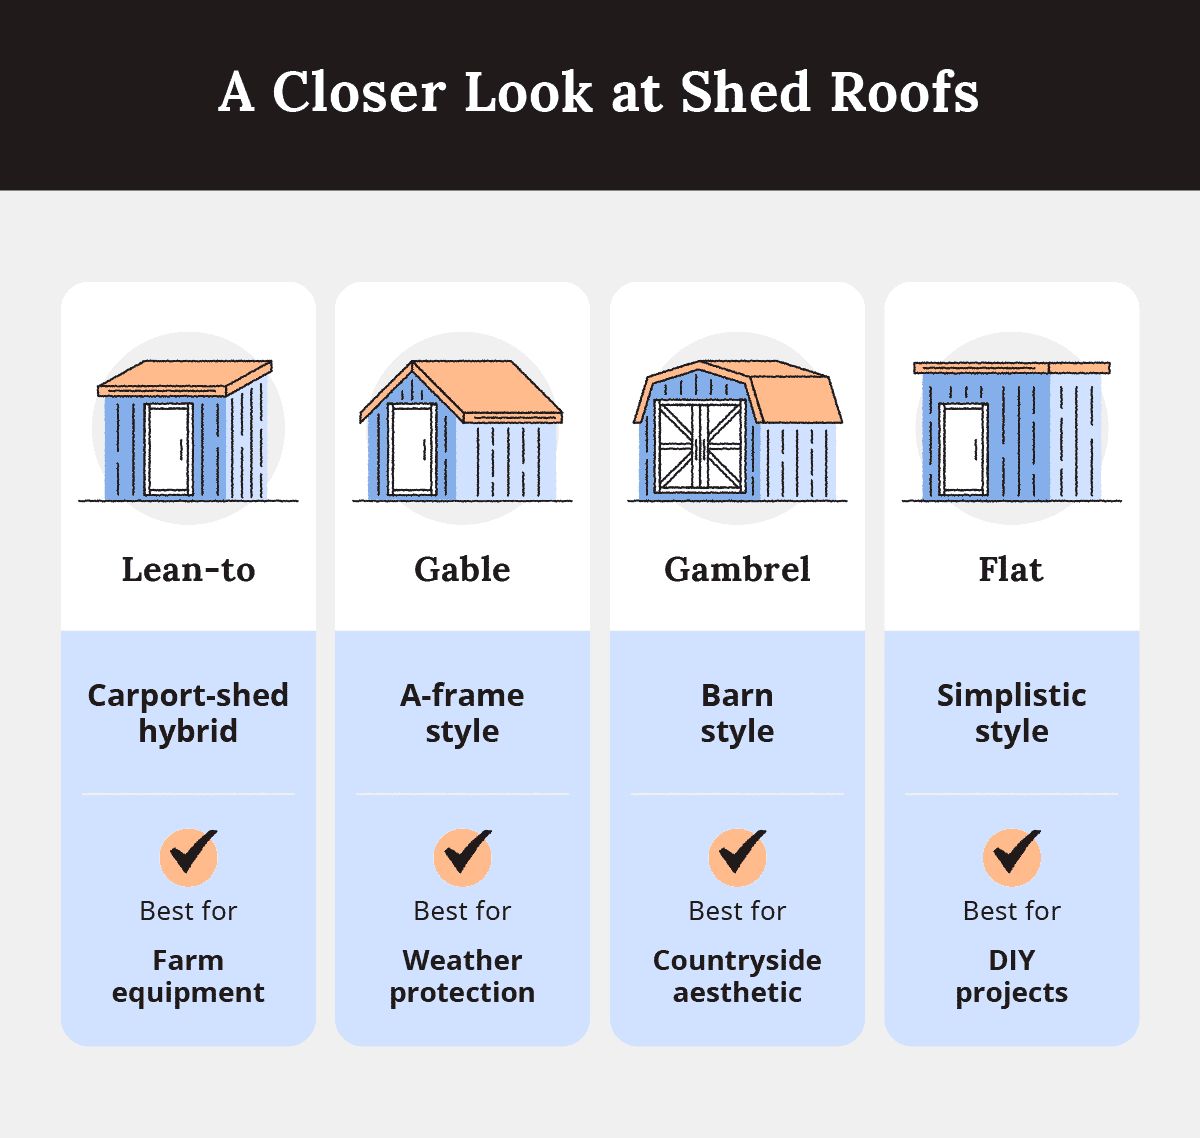 chart comparing different shed roofs